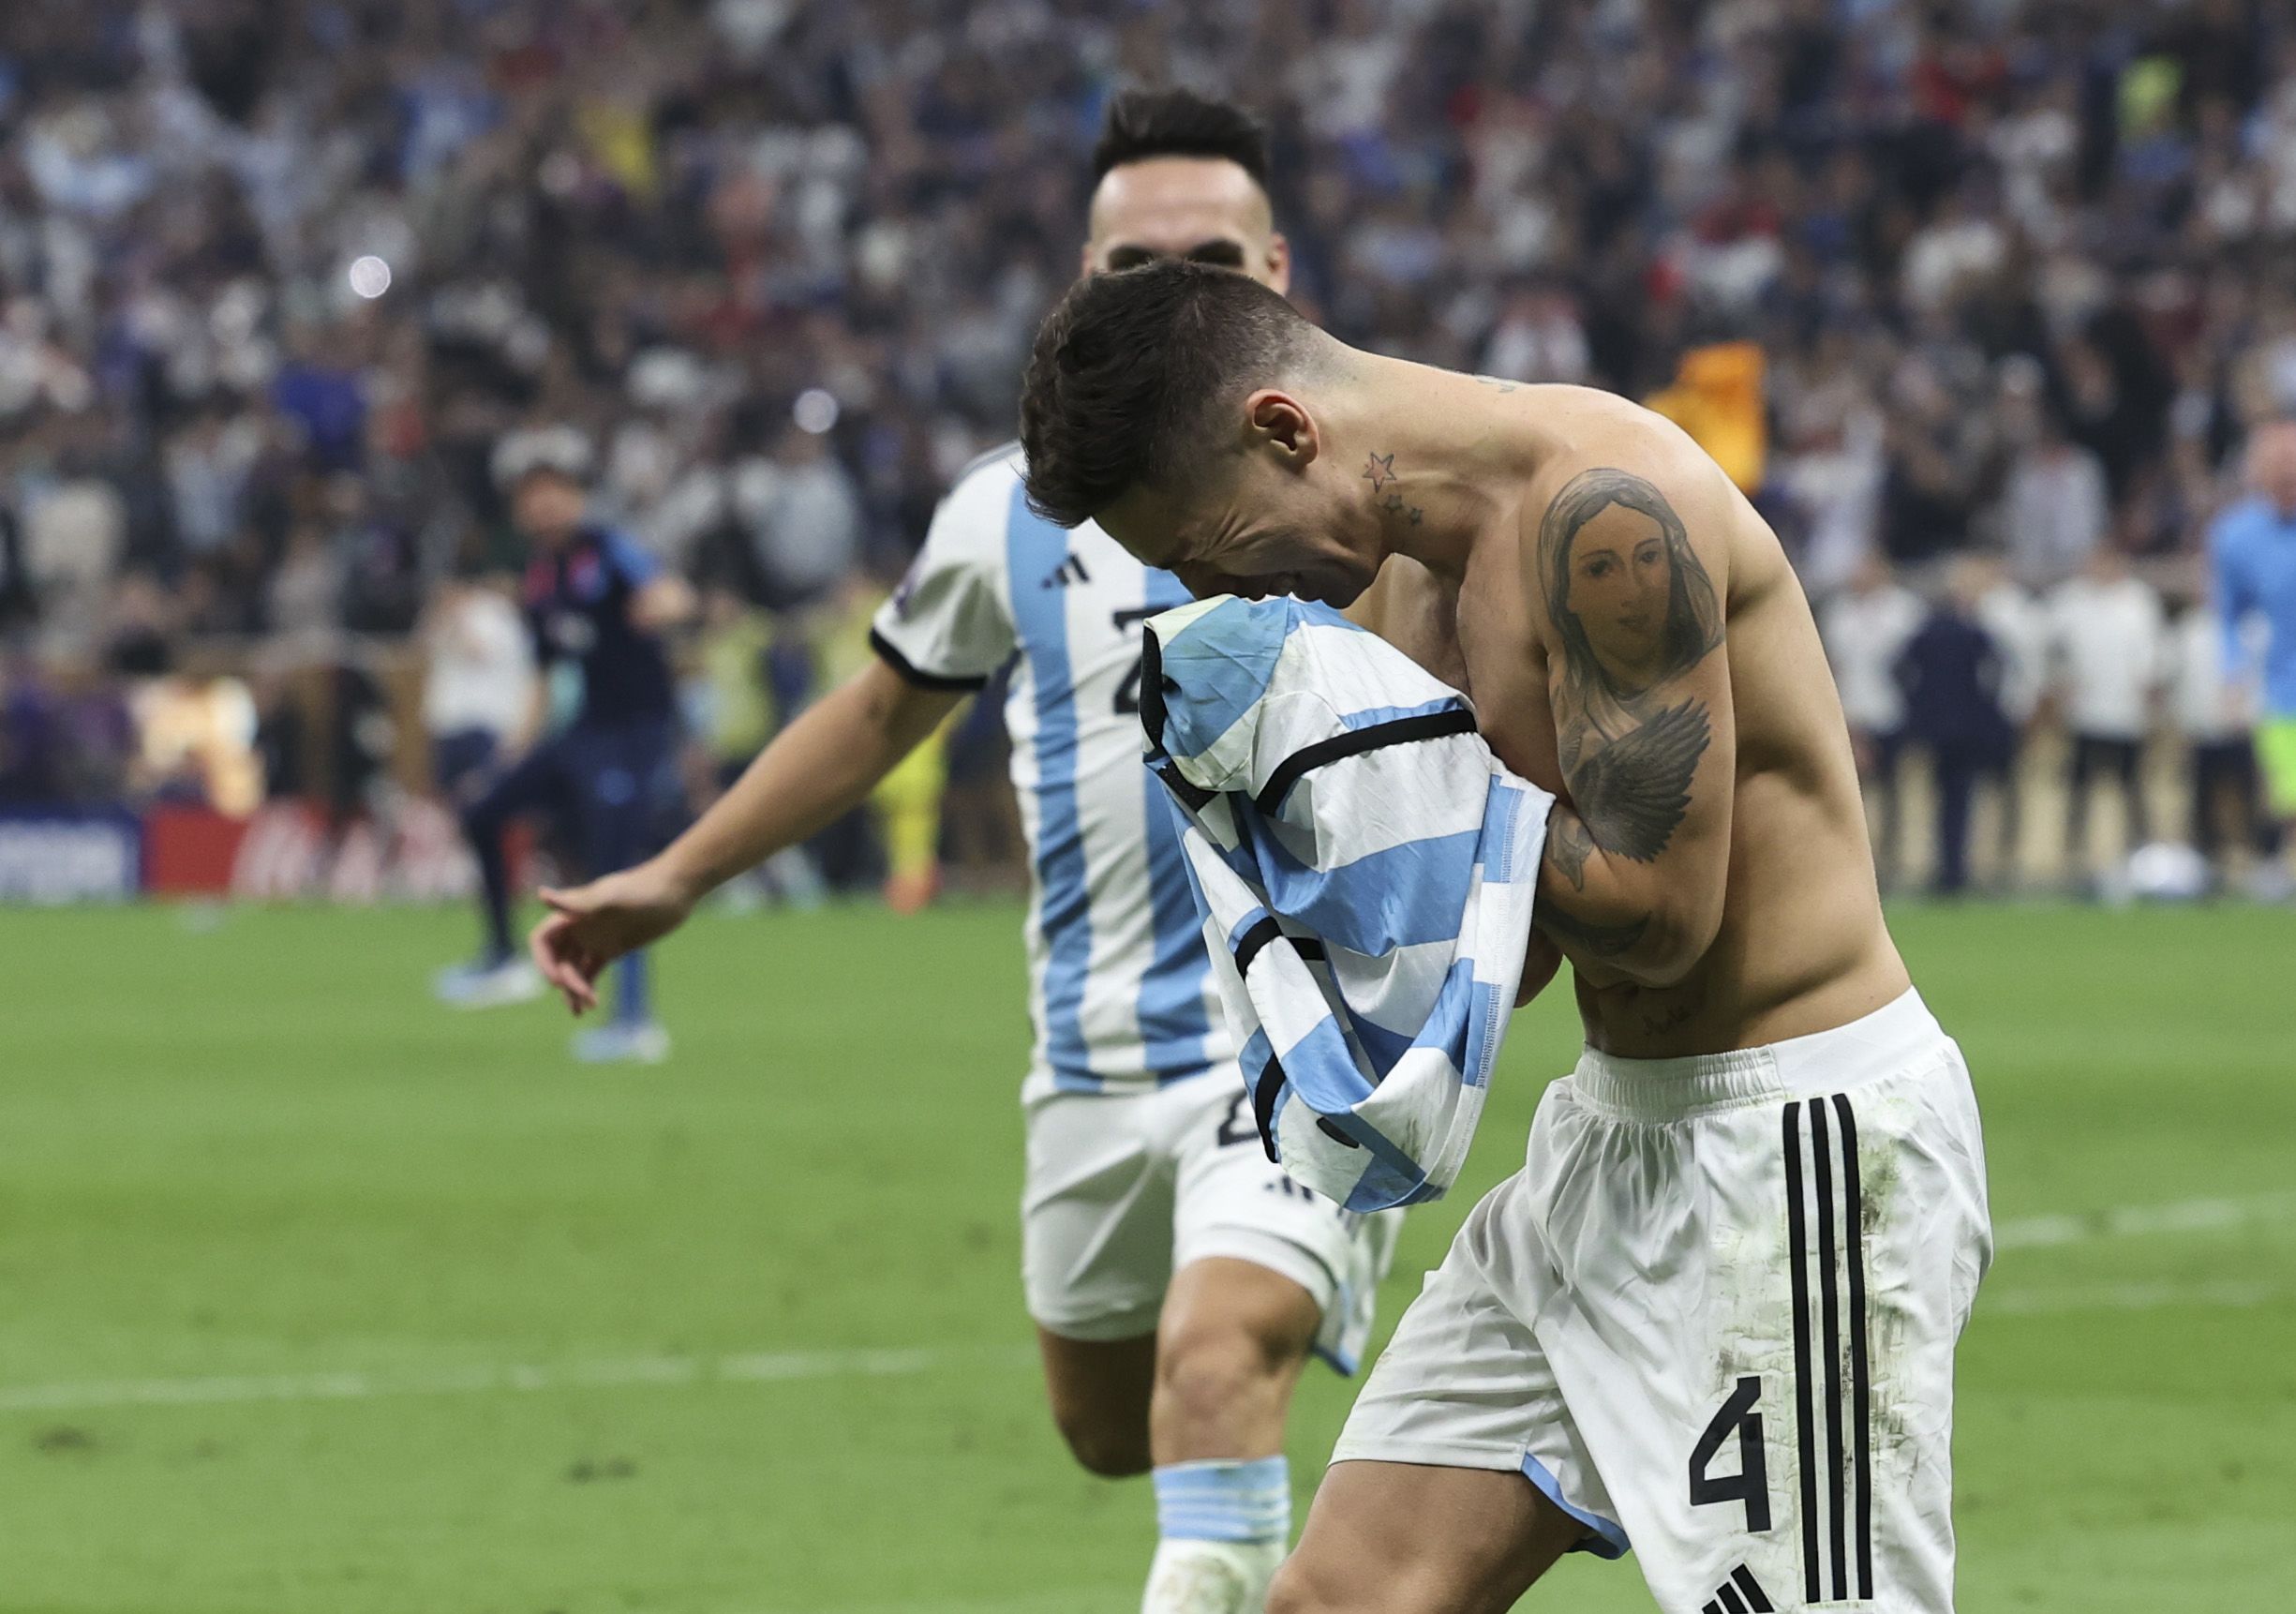 The best photos of the 2022 World Cup